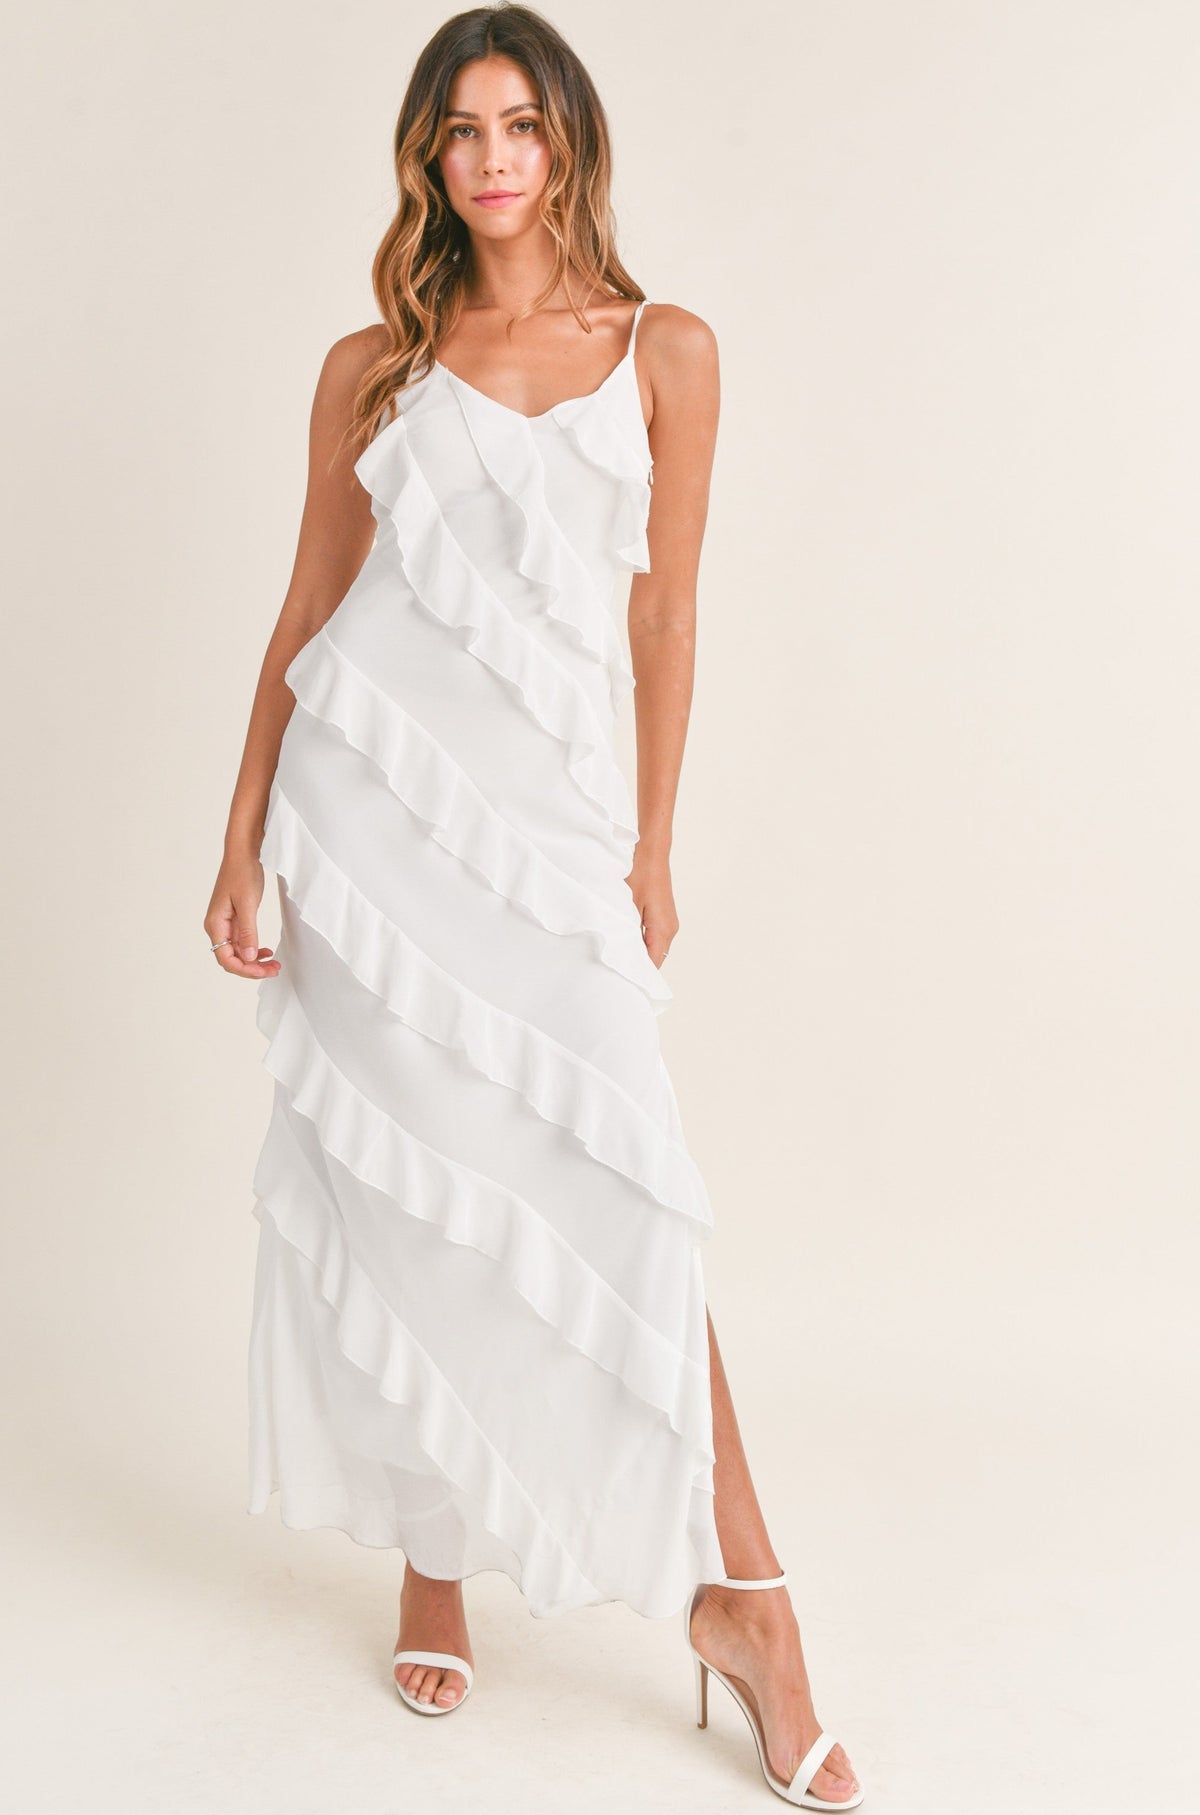 Bride To Be Maxi Dress